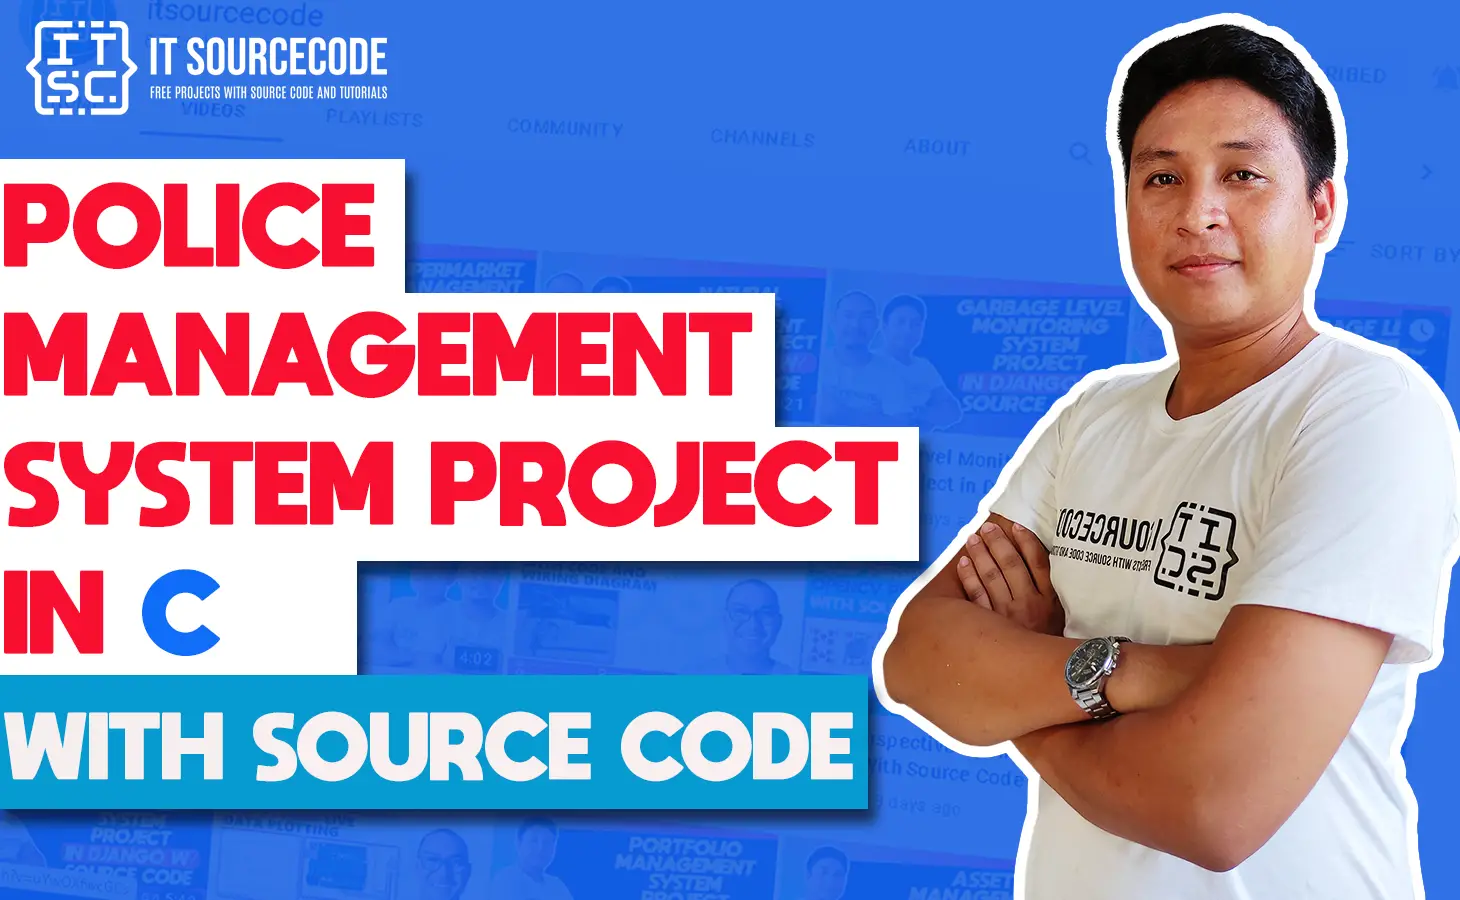 Police Management System Project in C with Source Code